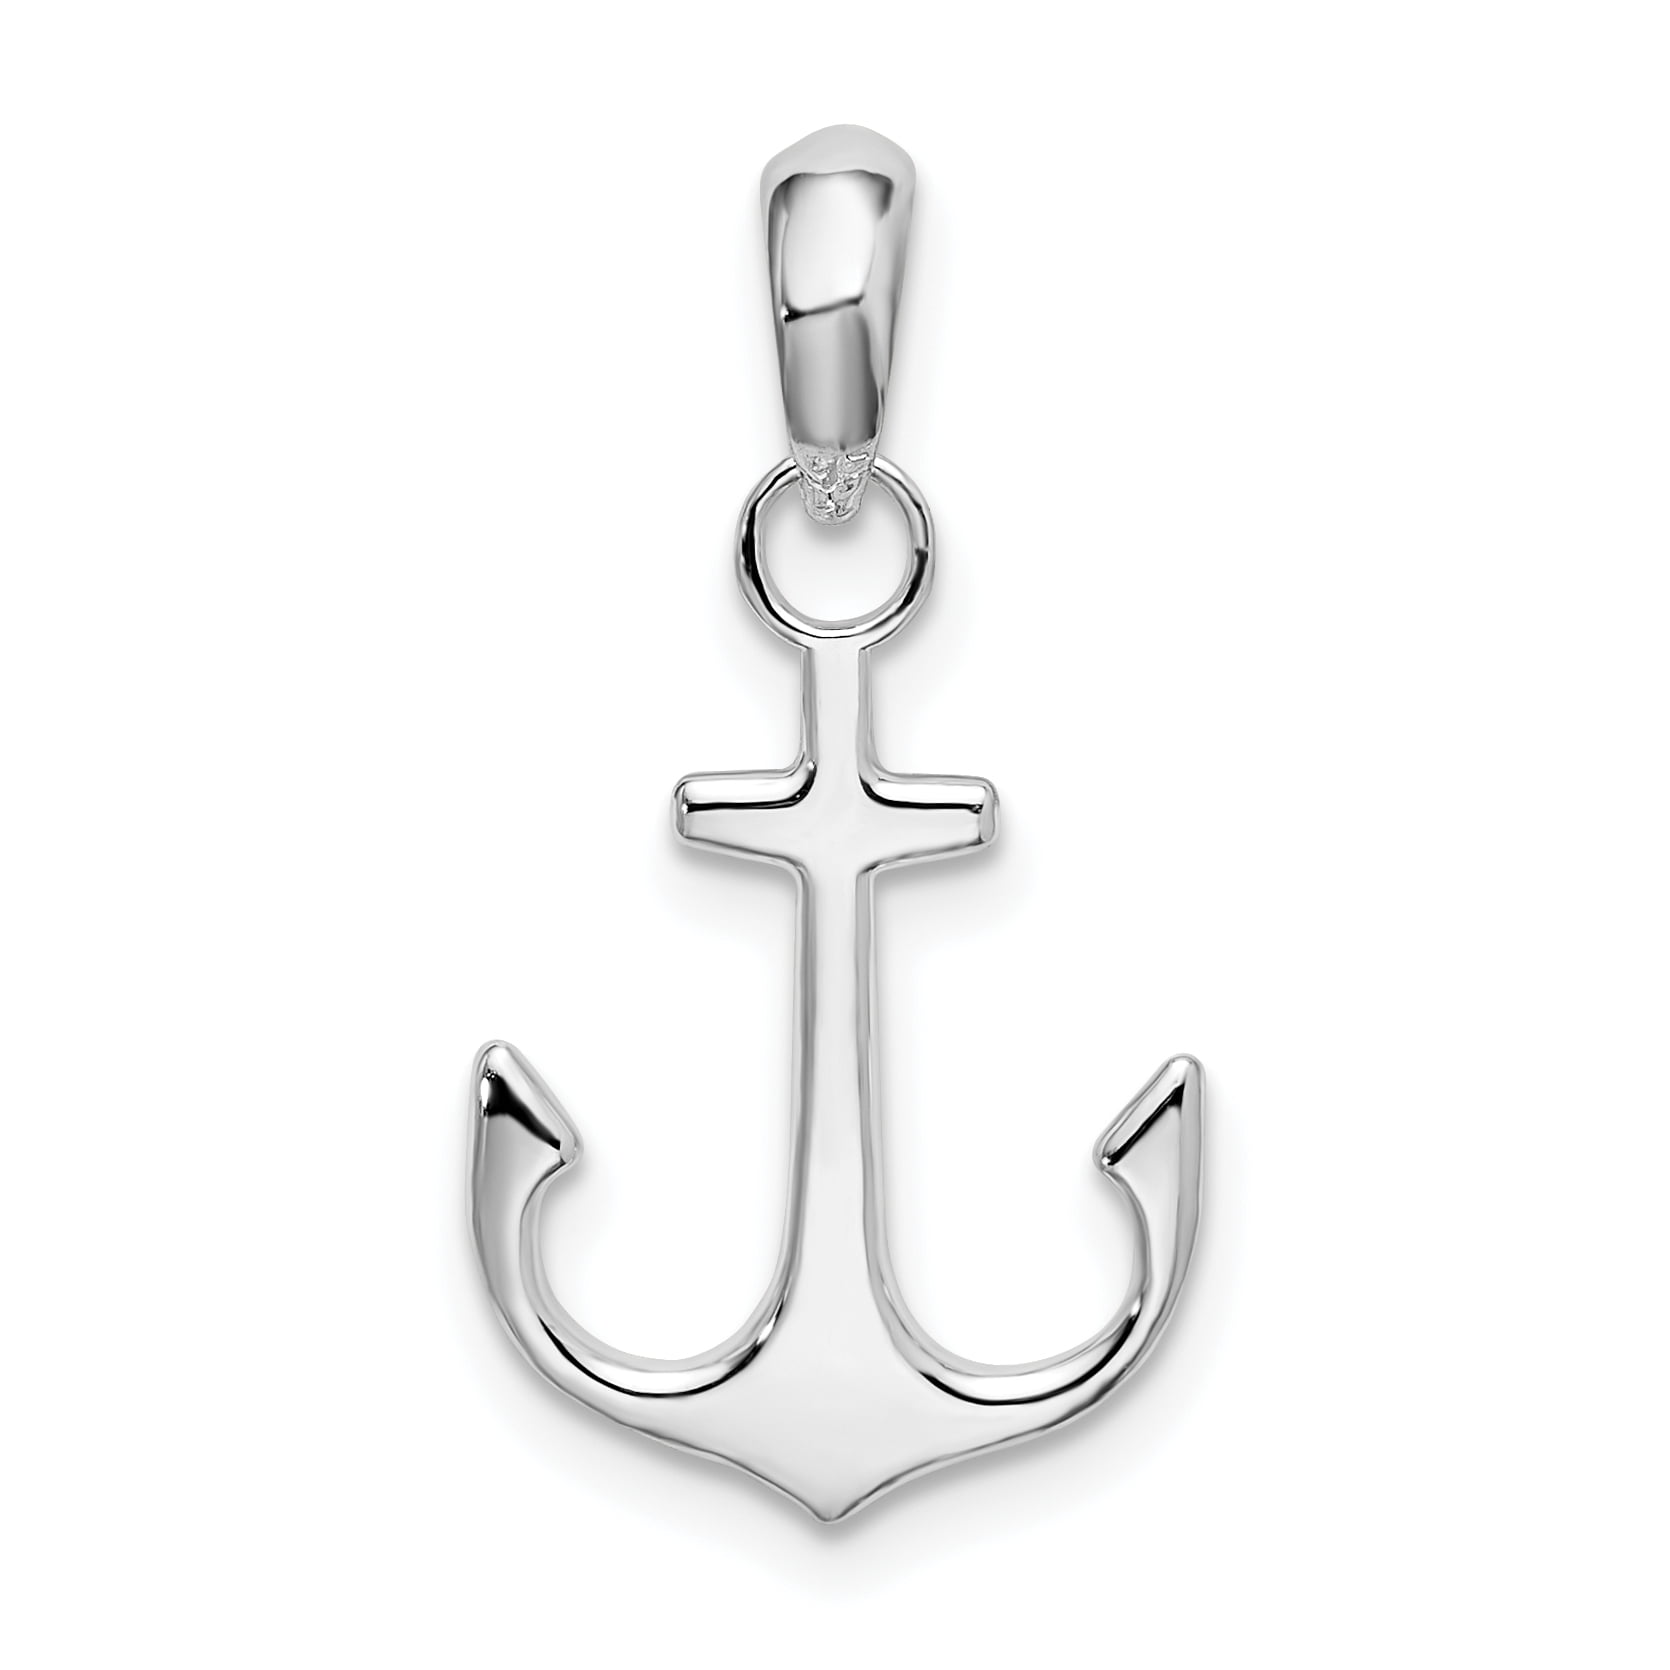 Sterling Silver Polished Anchor Pendant